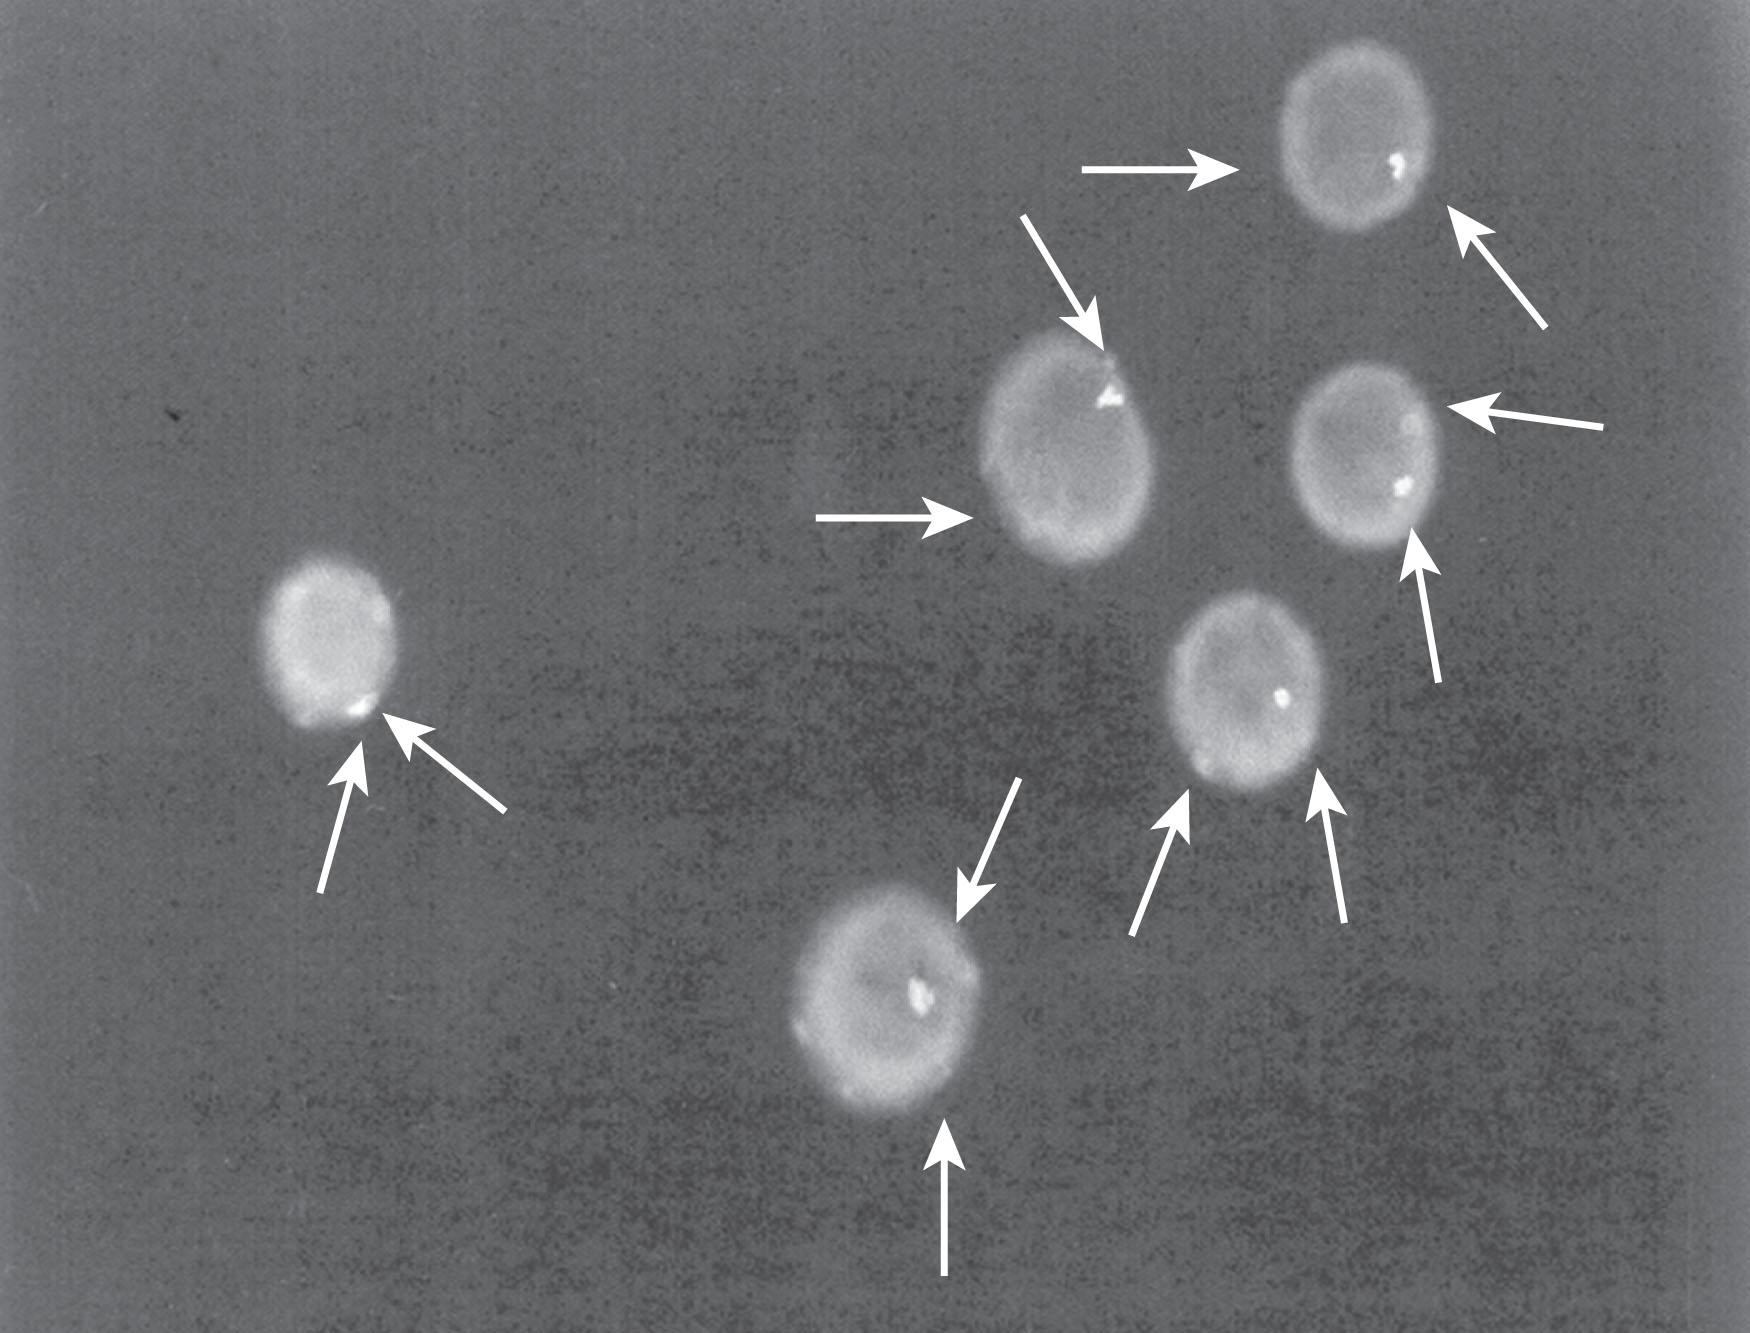 Fig. 85.12, Fluorescence in situ hybridization technique demonstrating the sex chromosome constitution of peripheral blood leukocytes. Arrows point to sex chromosomes in each cell.